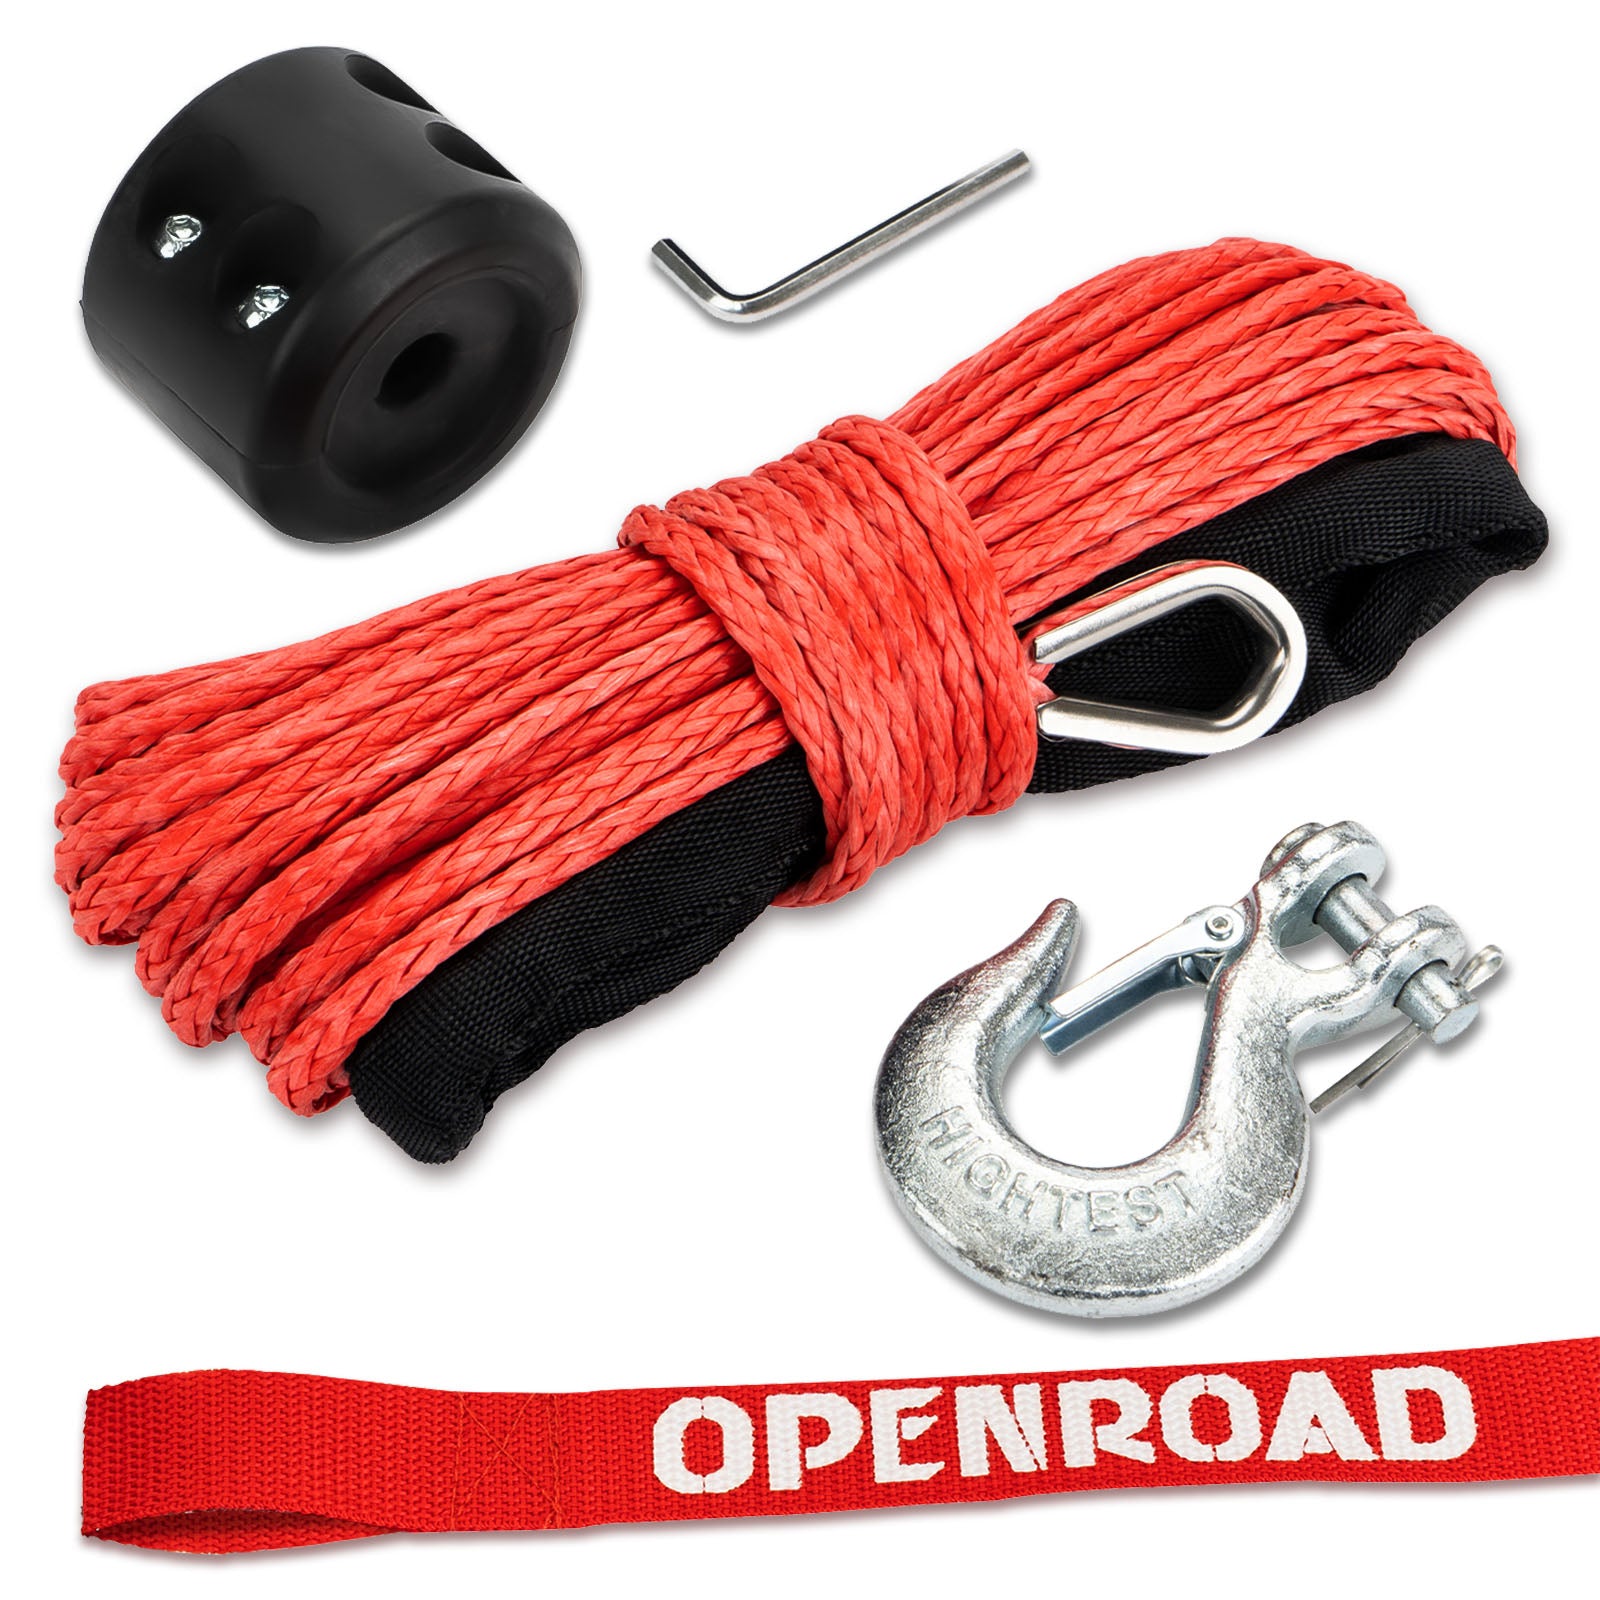 OPENROAD Synthetic Winch Rope 1/4 x 50'Winch Rope Extension with